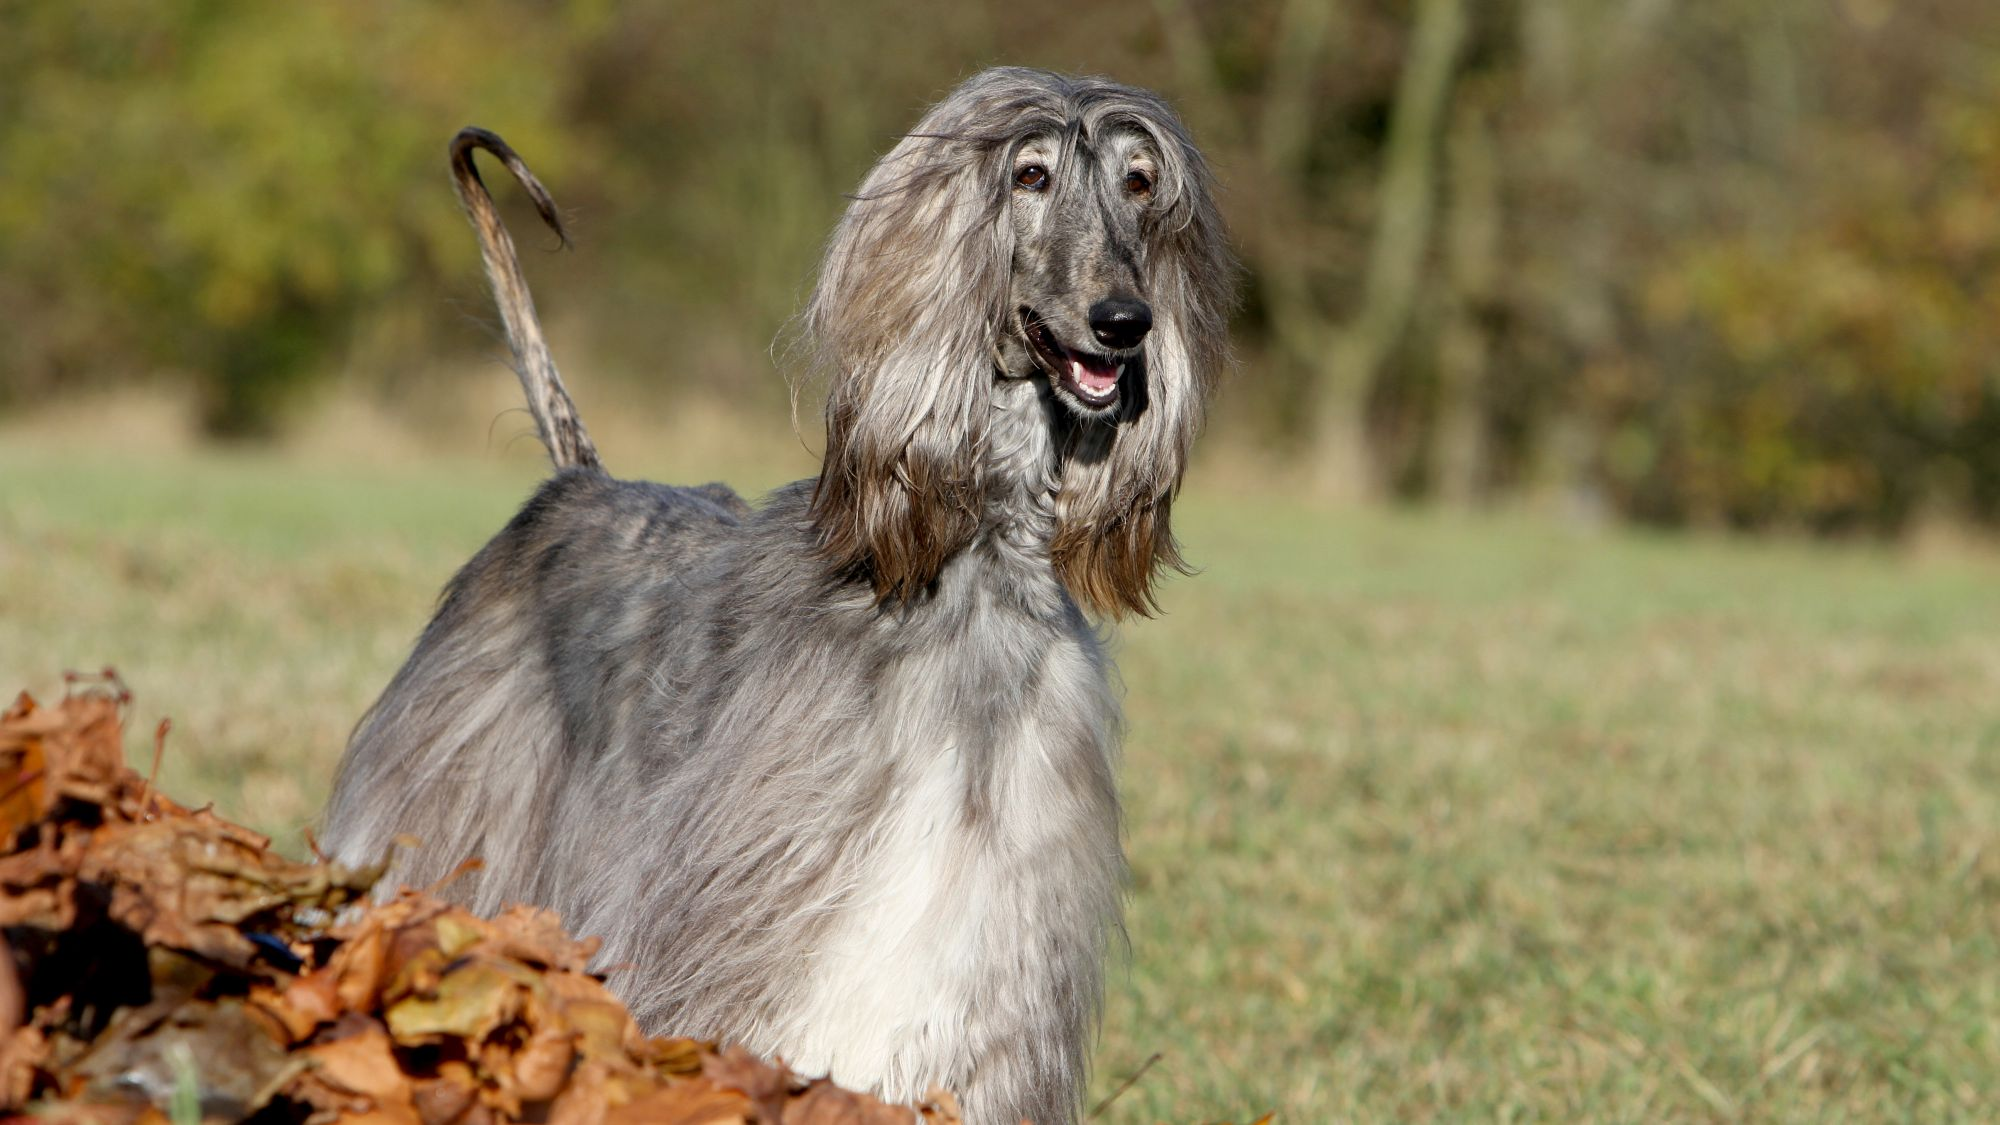 Afghan Hound standing towards camera